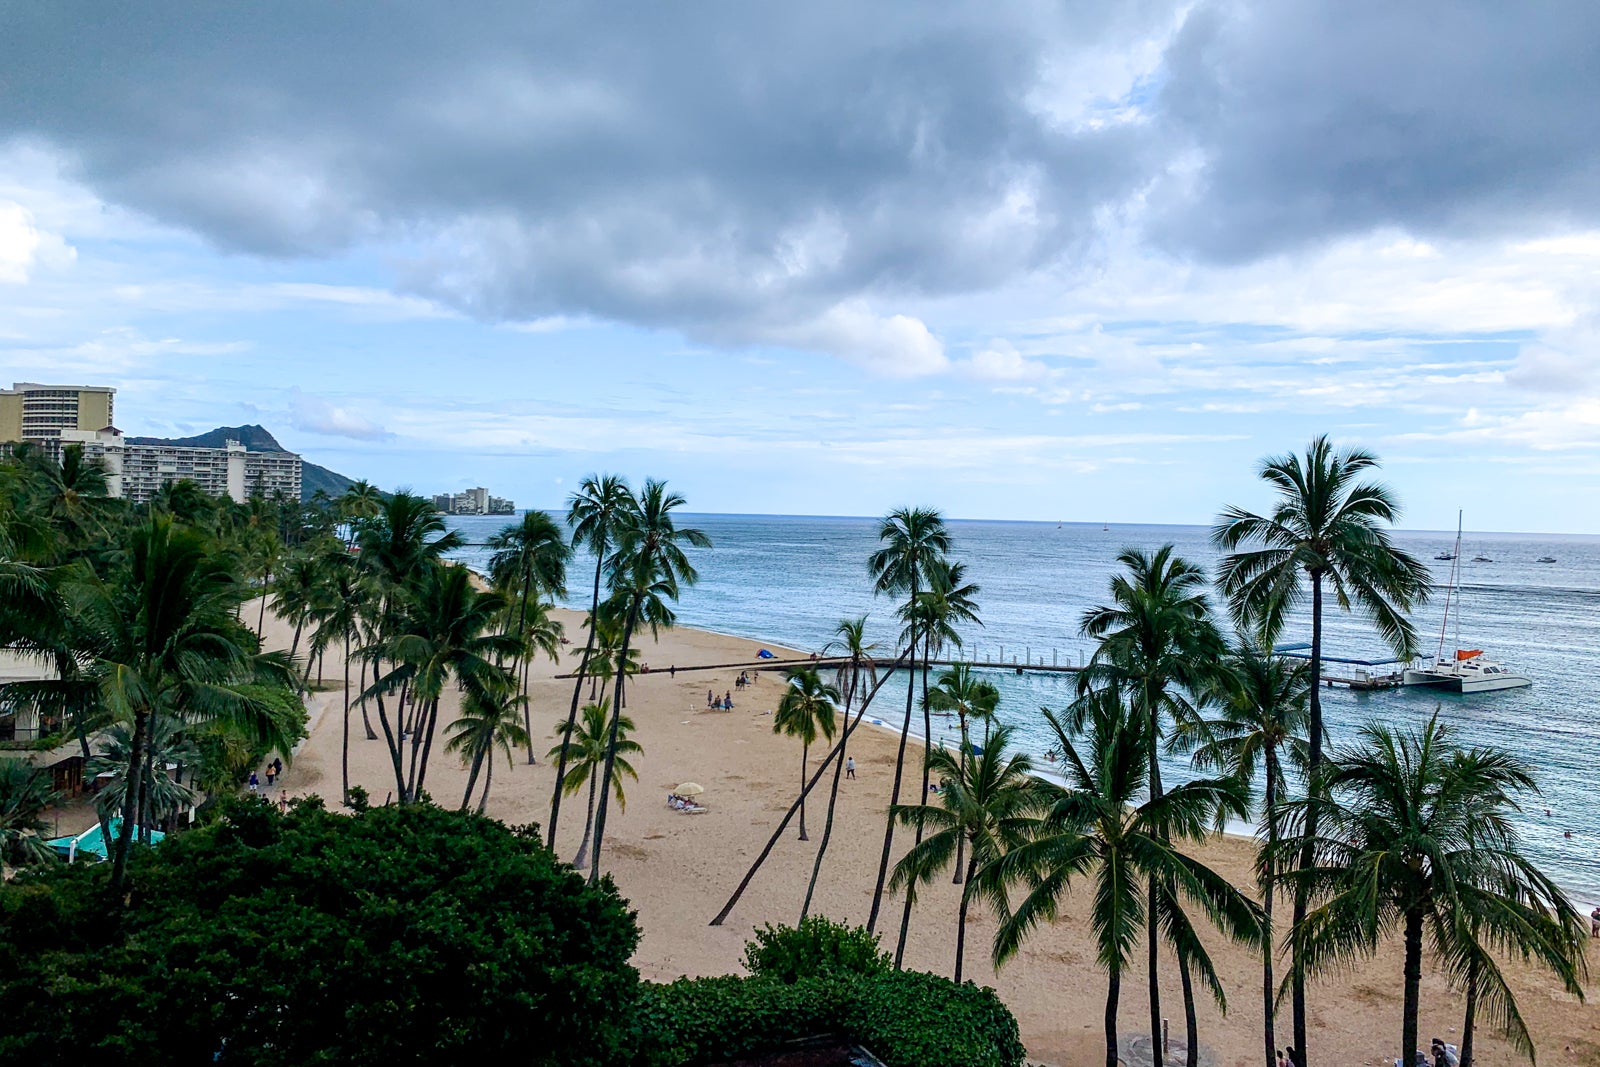 A Duo of Hilton Hawaiian Beach Resorts Offers Even More Perks for